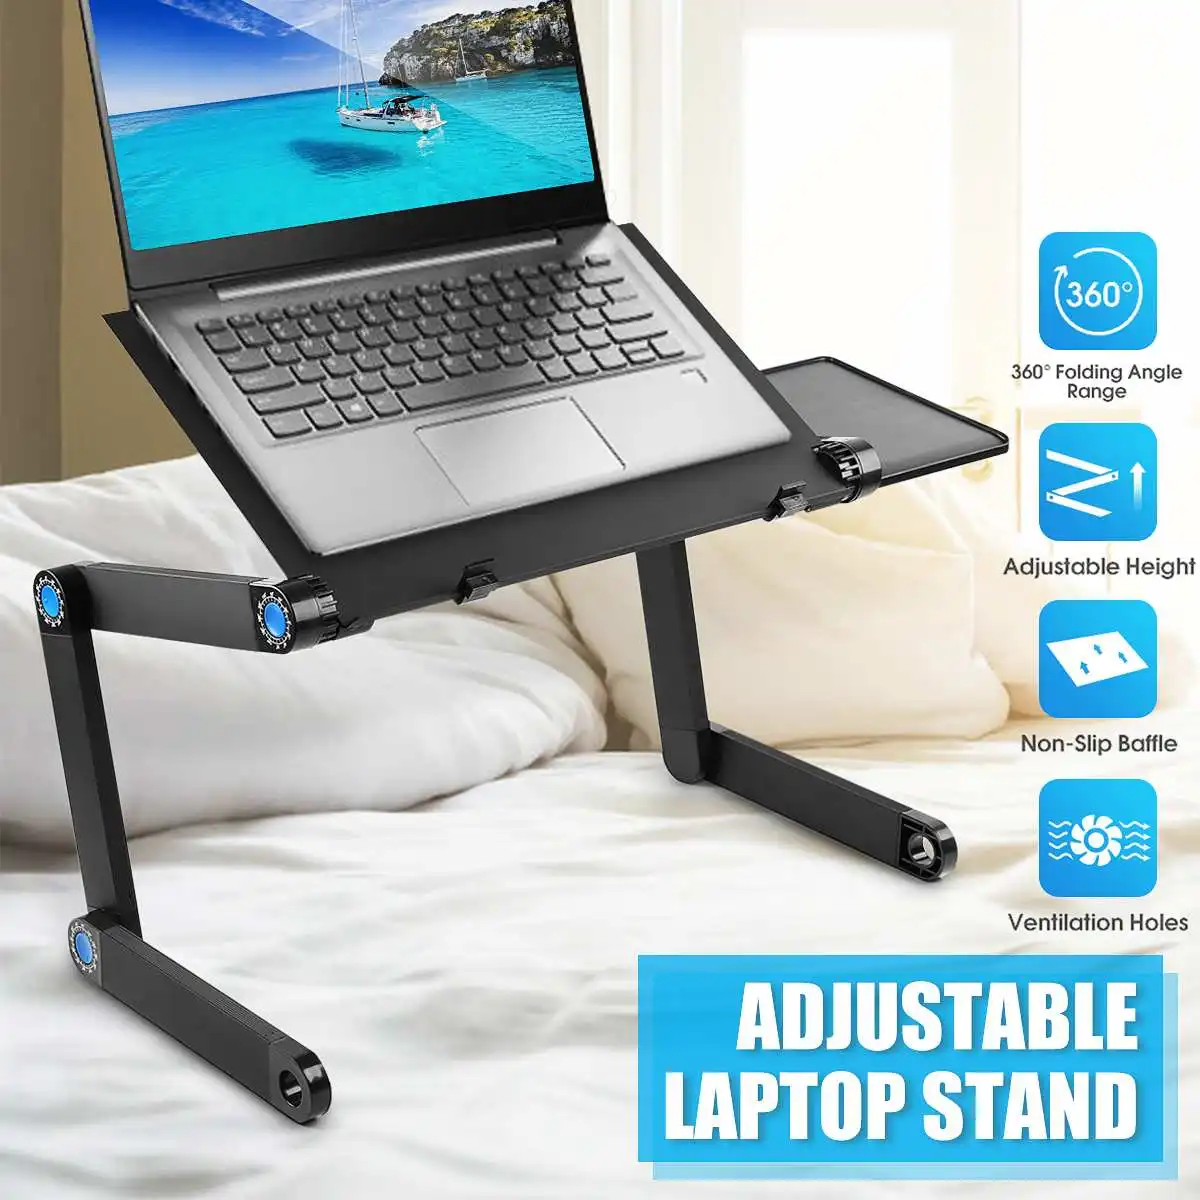 52.5x26.4x5cm Aluminum Laptop Folding Table Computer Desk Stand for Bed 360 Degree Rotation MultiFunctional Portable Table